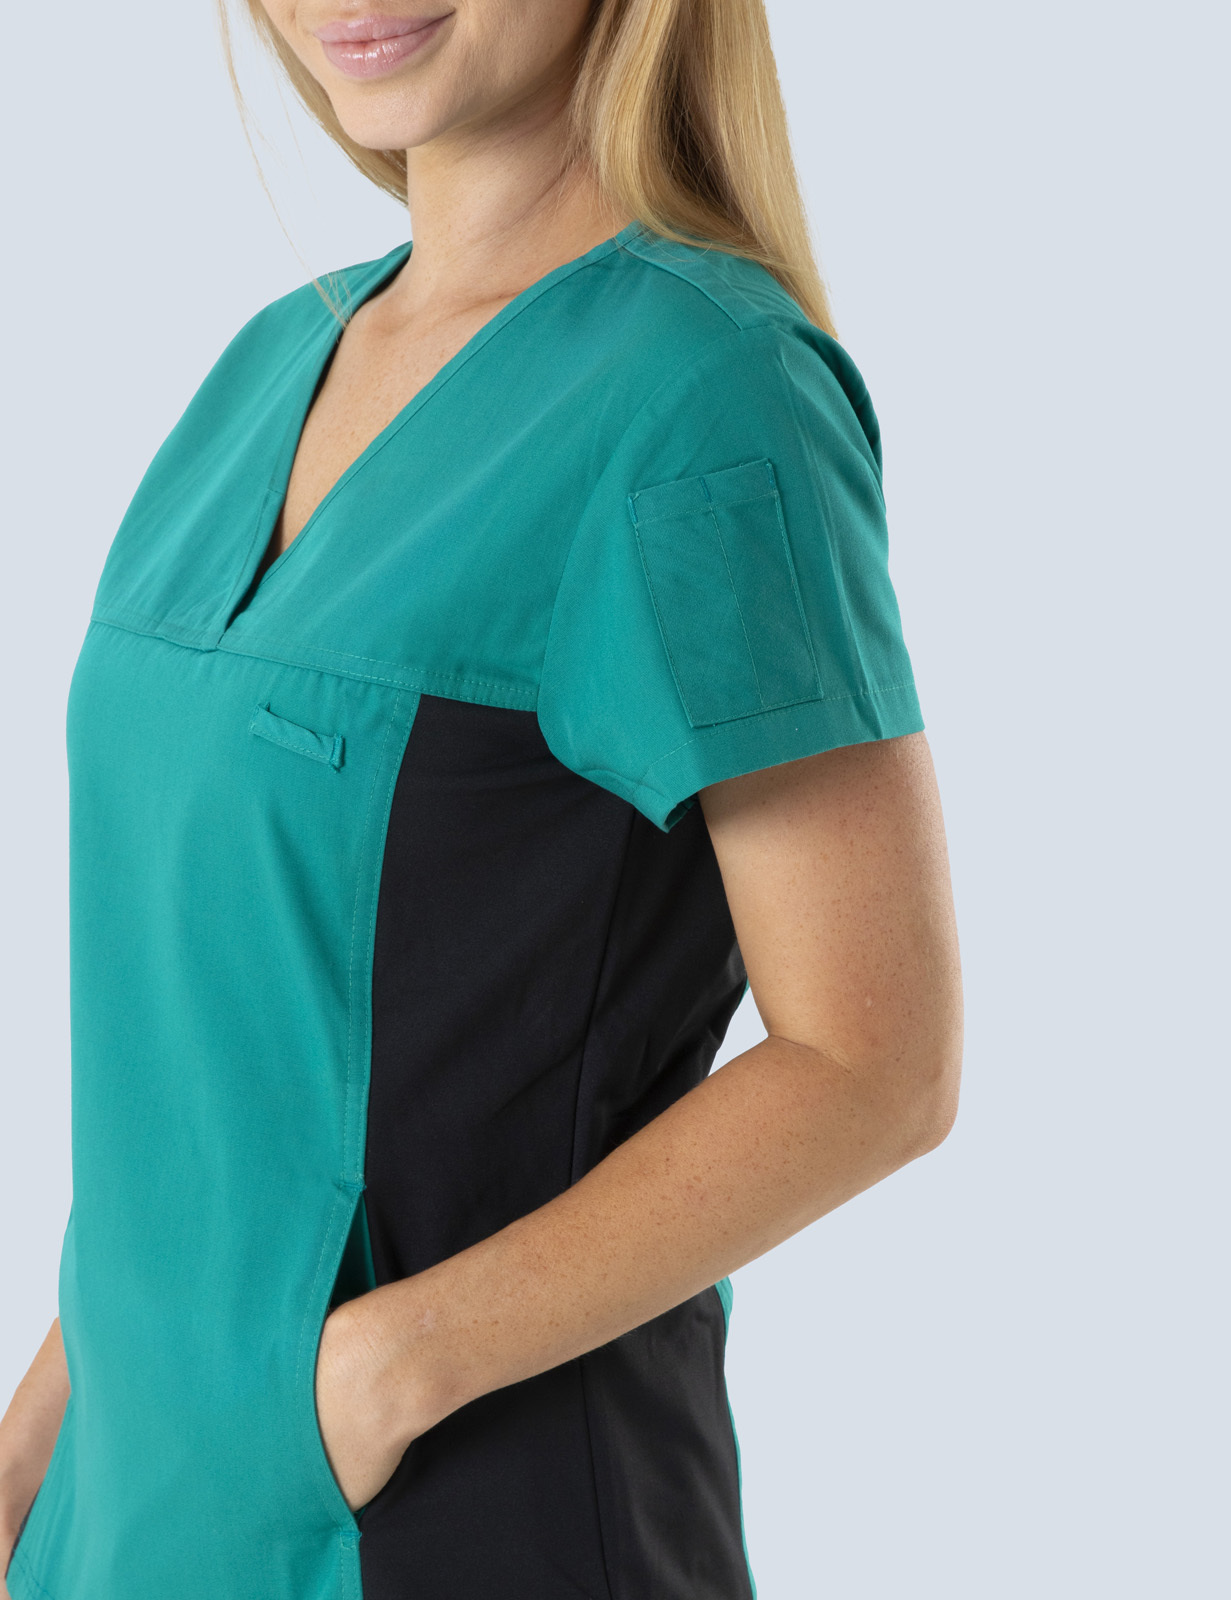 Ashmore Retreat Endorsed Enrolled Nurse Top Only Bundle (Women's Fit Spandex in Hunter incl Logo) 